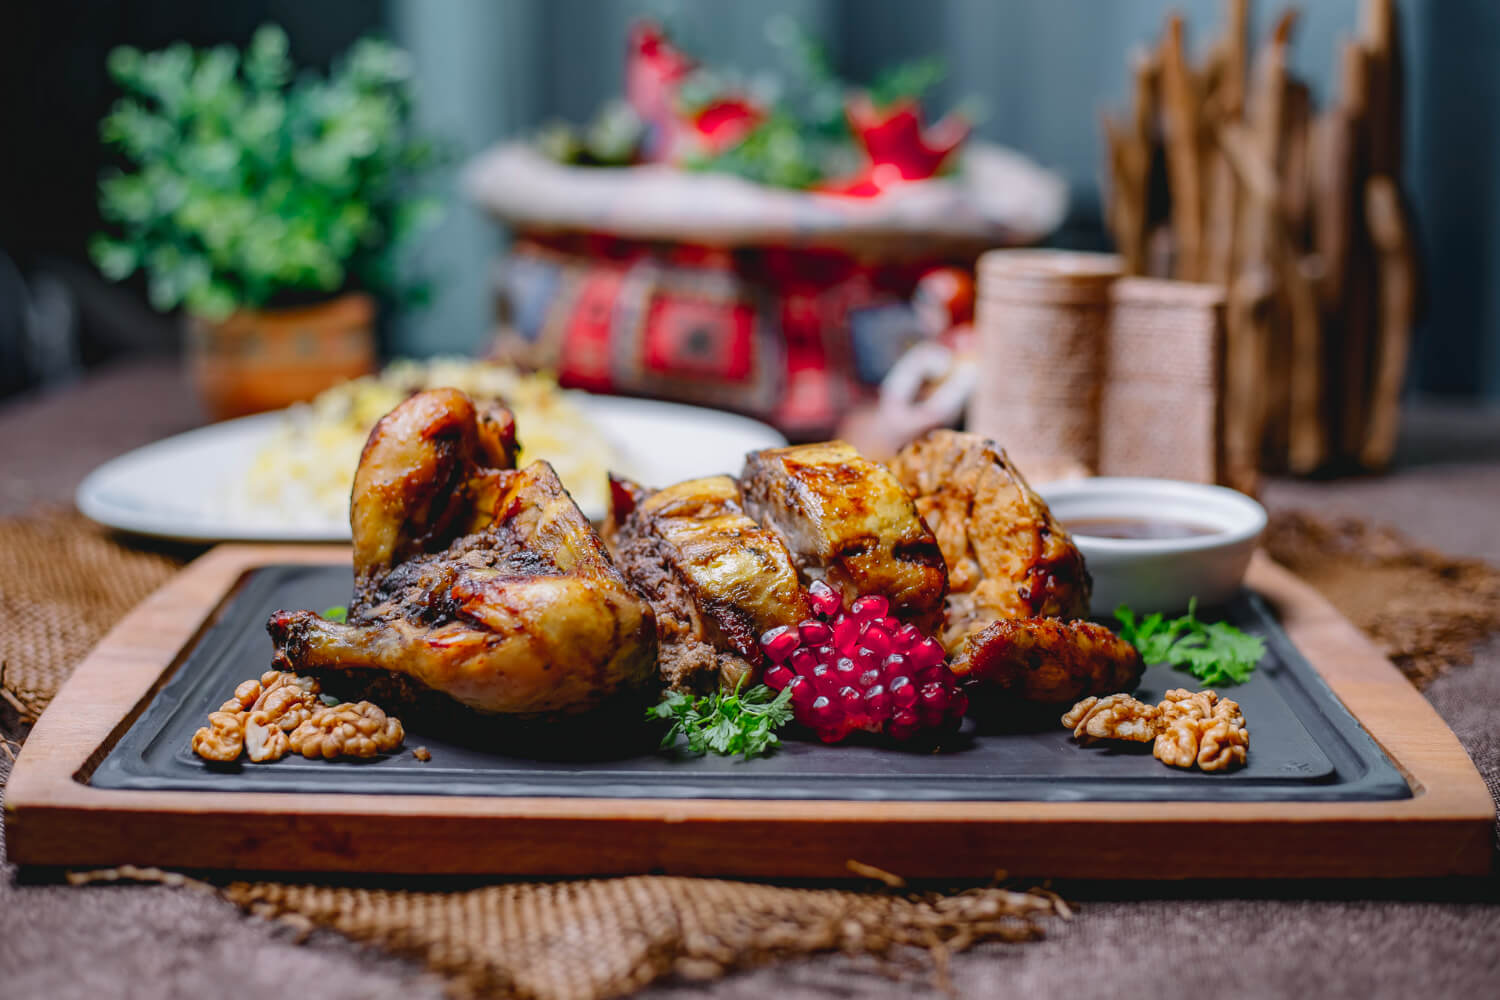 roasted stuffed chicken decorated with pomegranate walnuts black board rice white plate wooden table